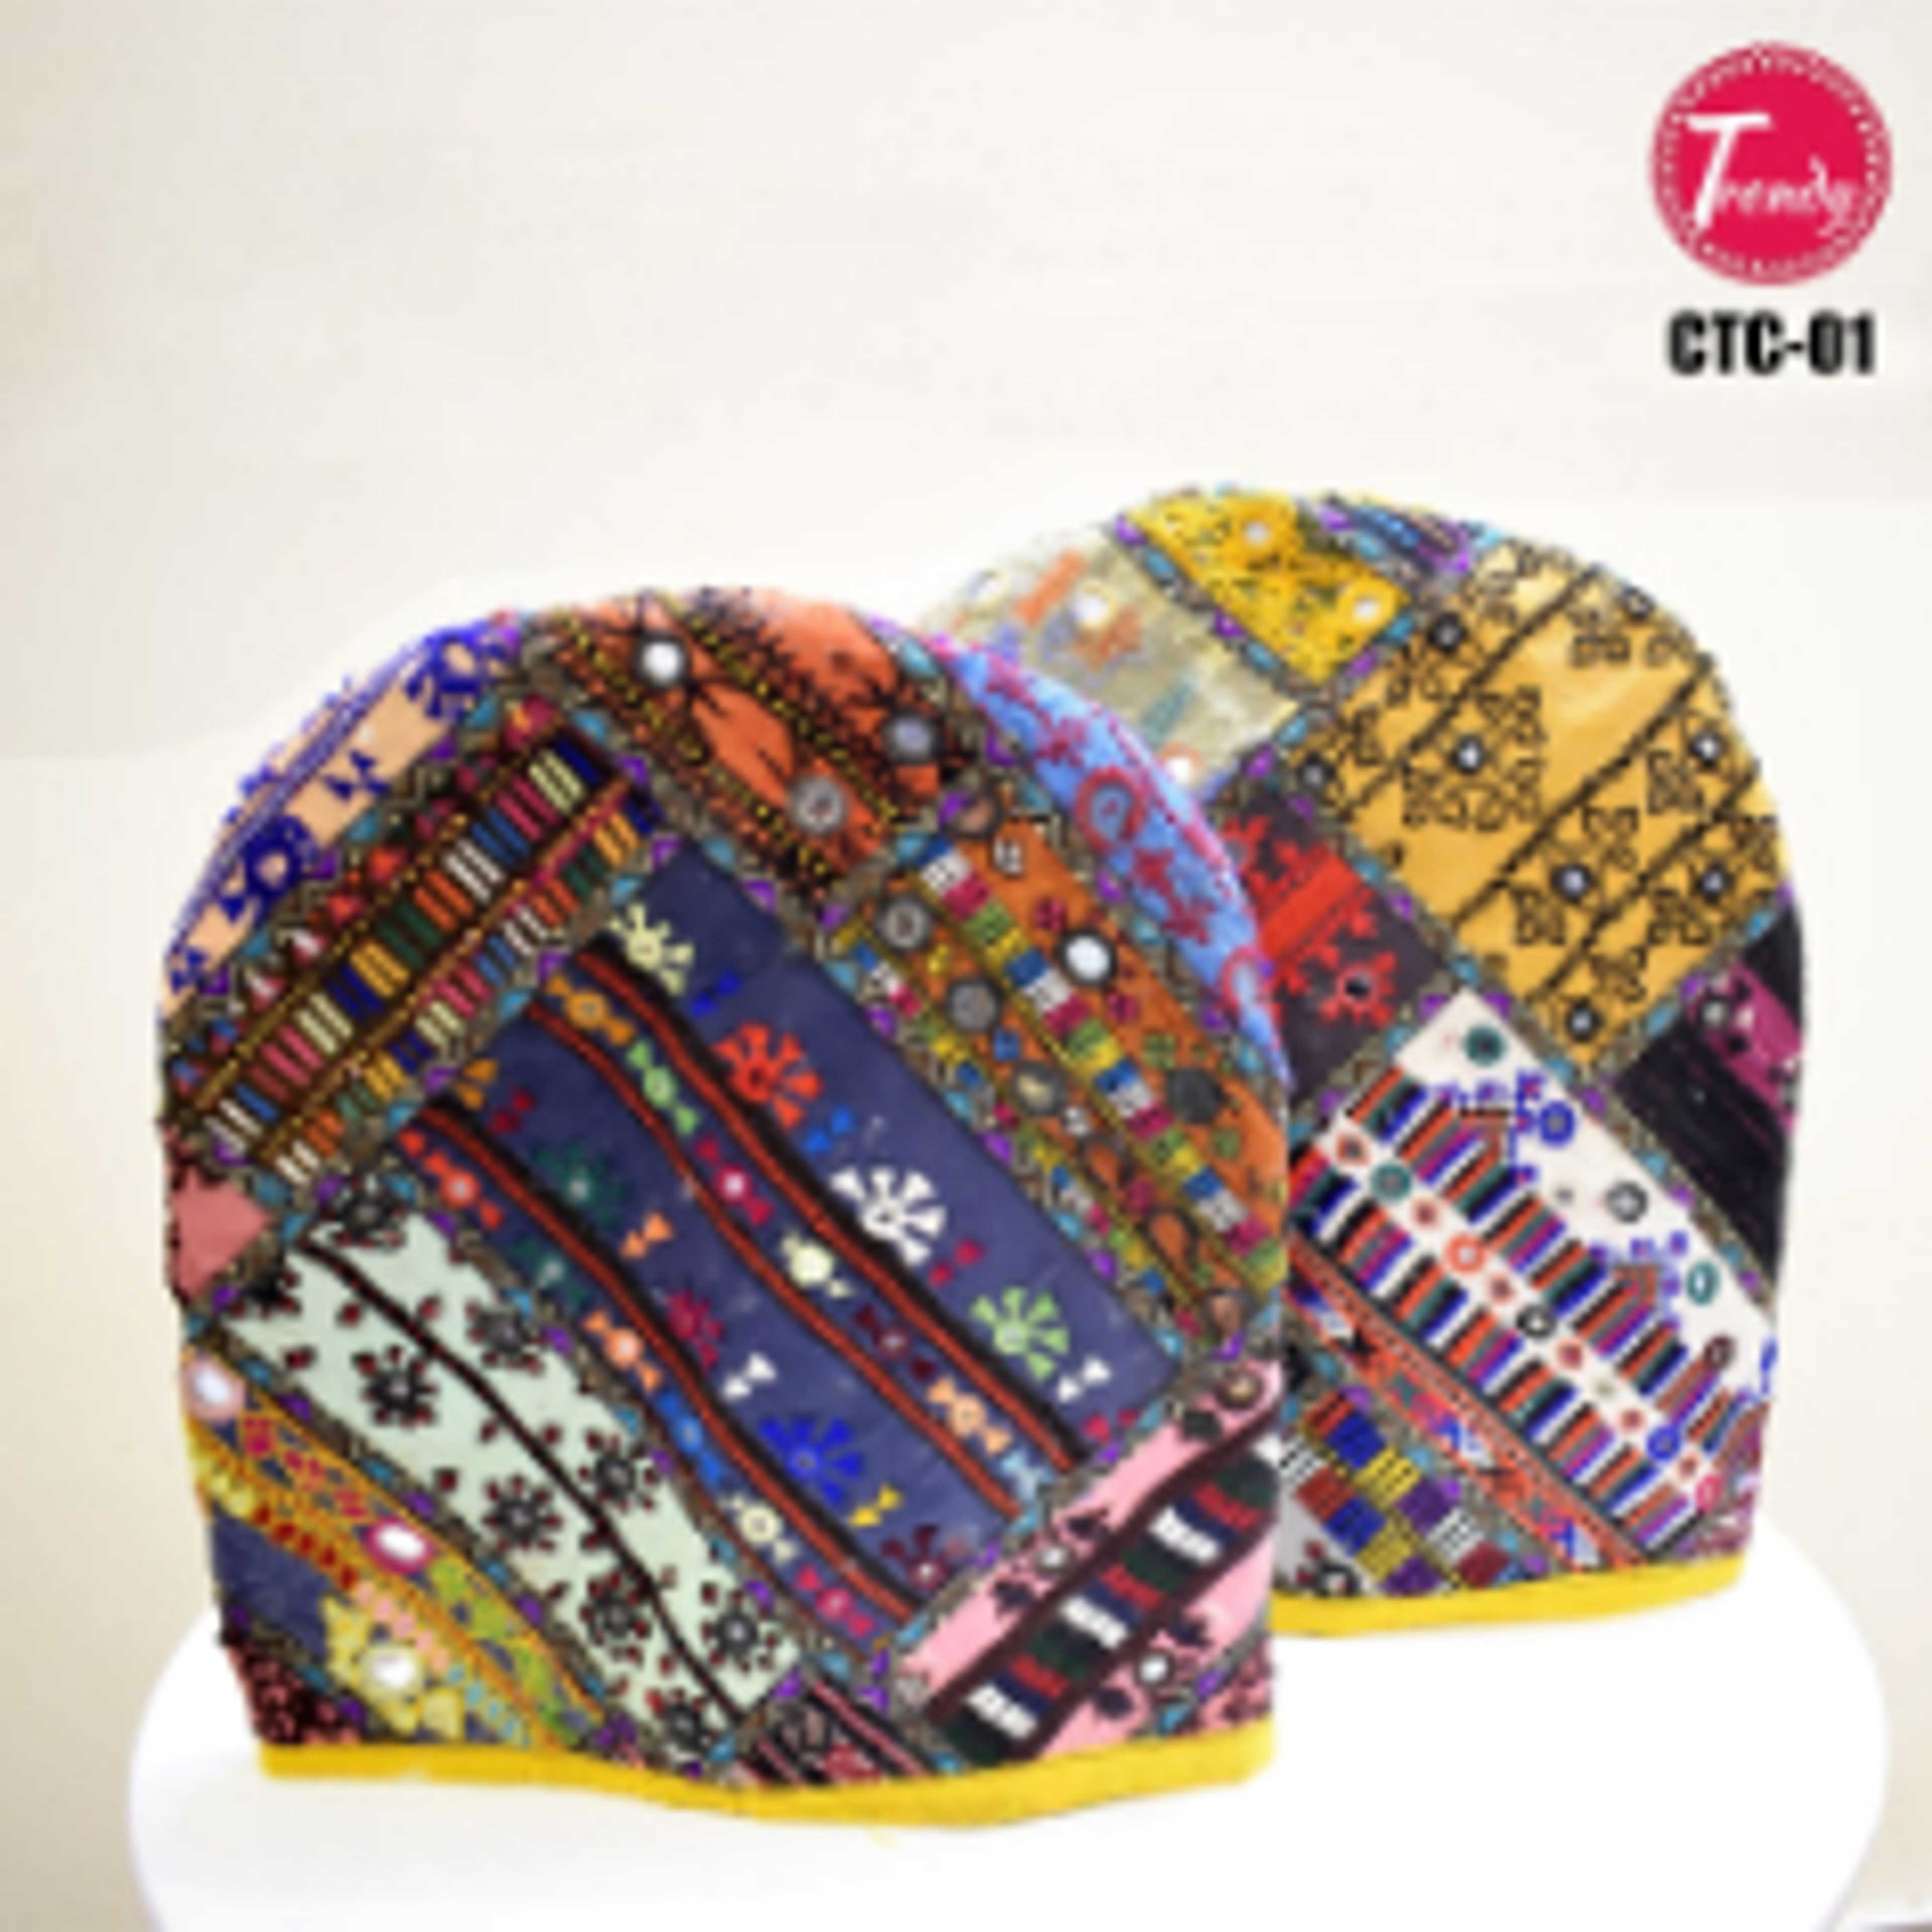 Sindhi Hand Crafted Embroidery Tea Cozy Pair CTC-01